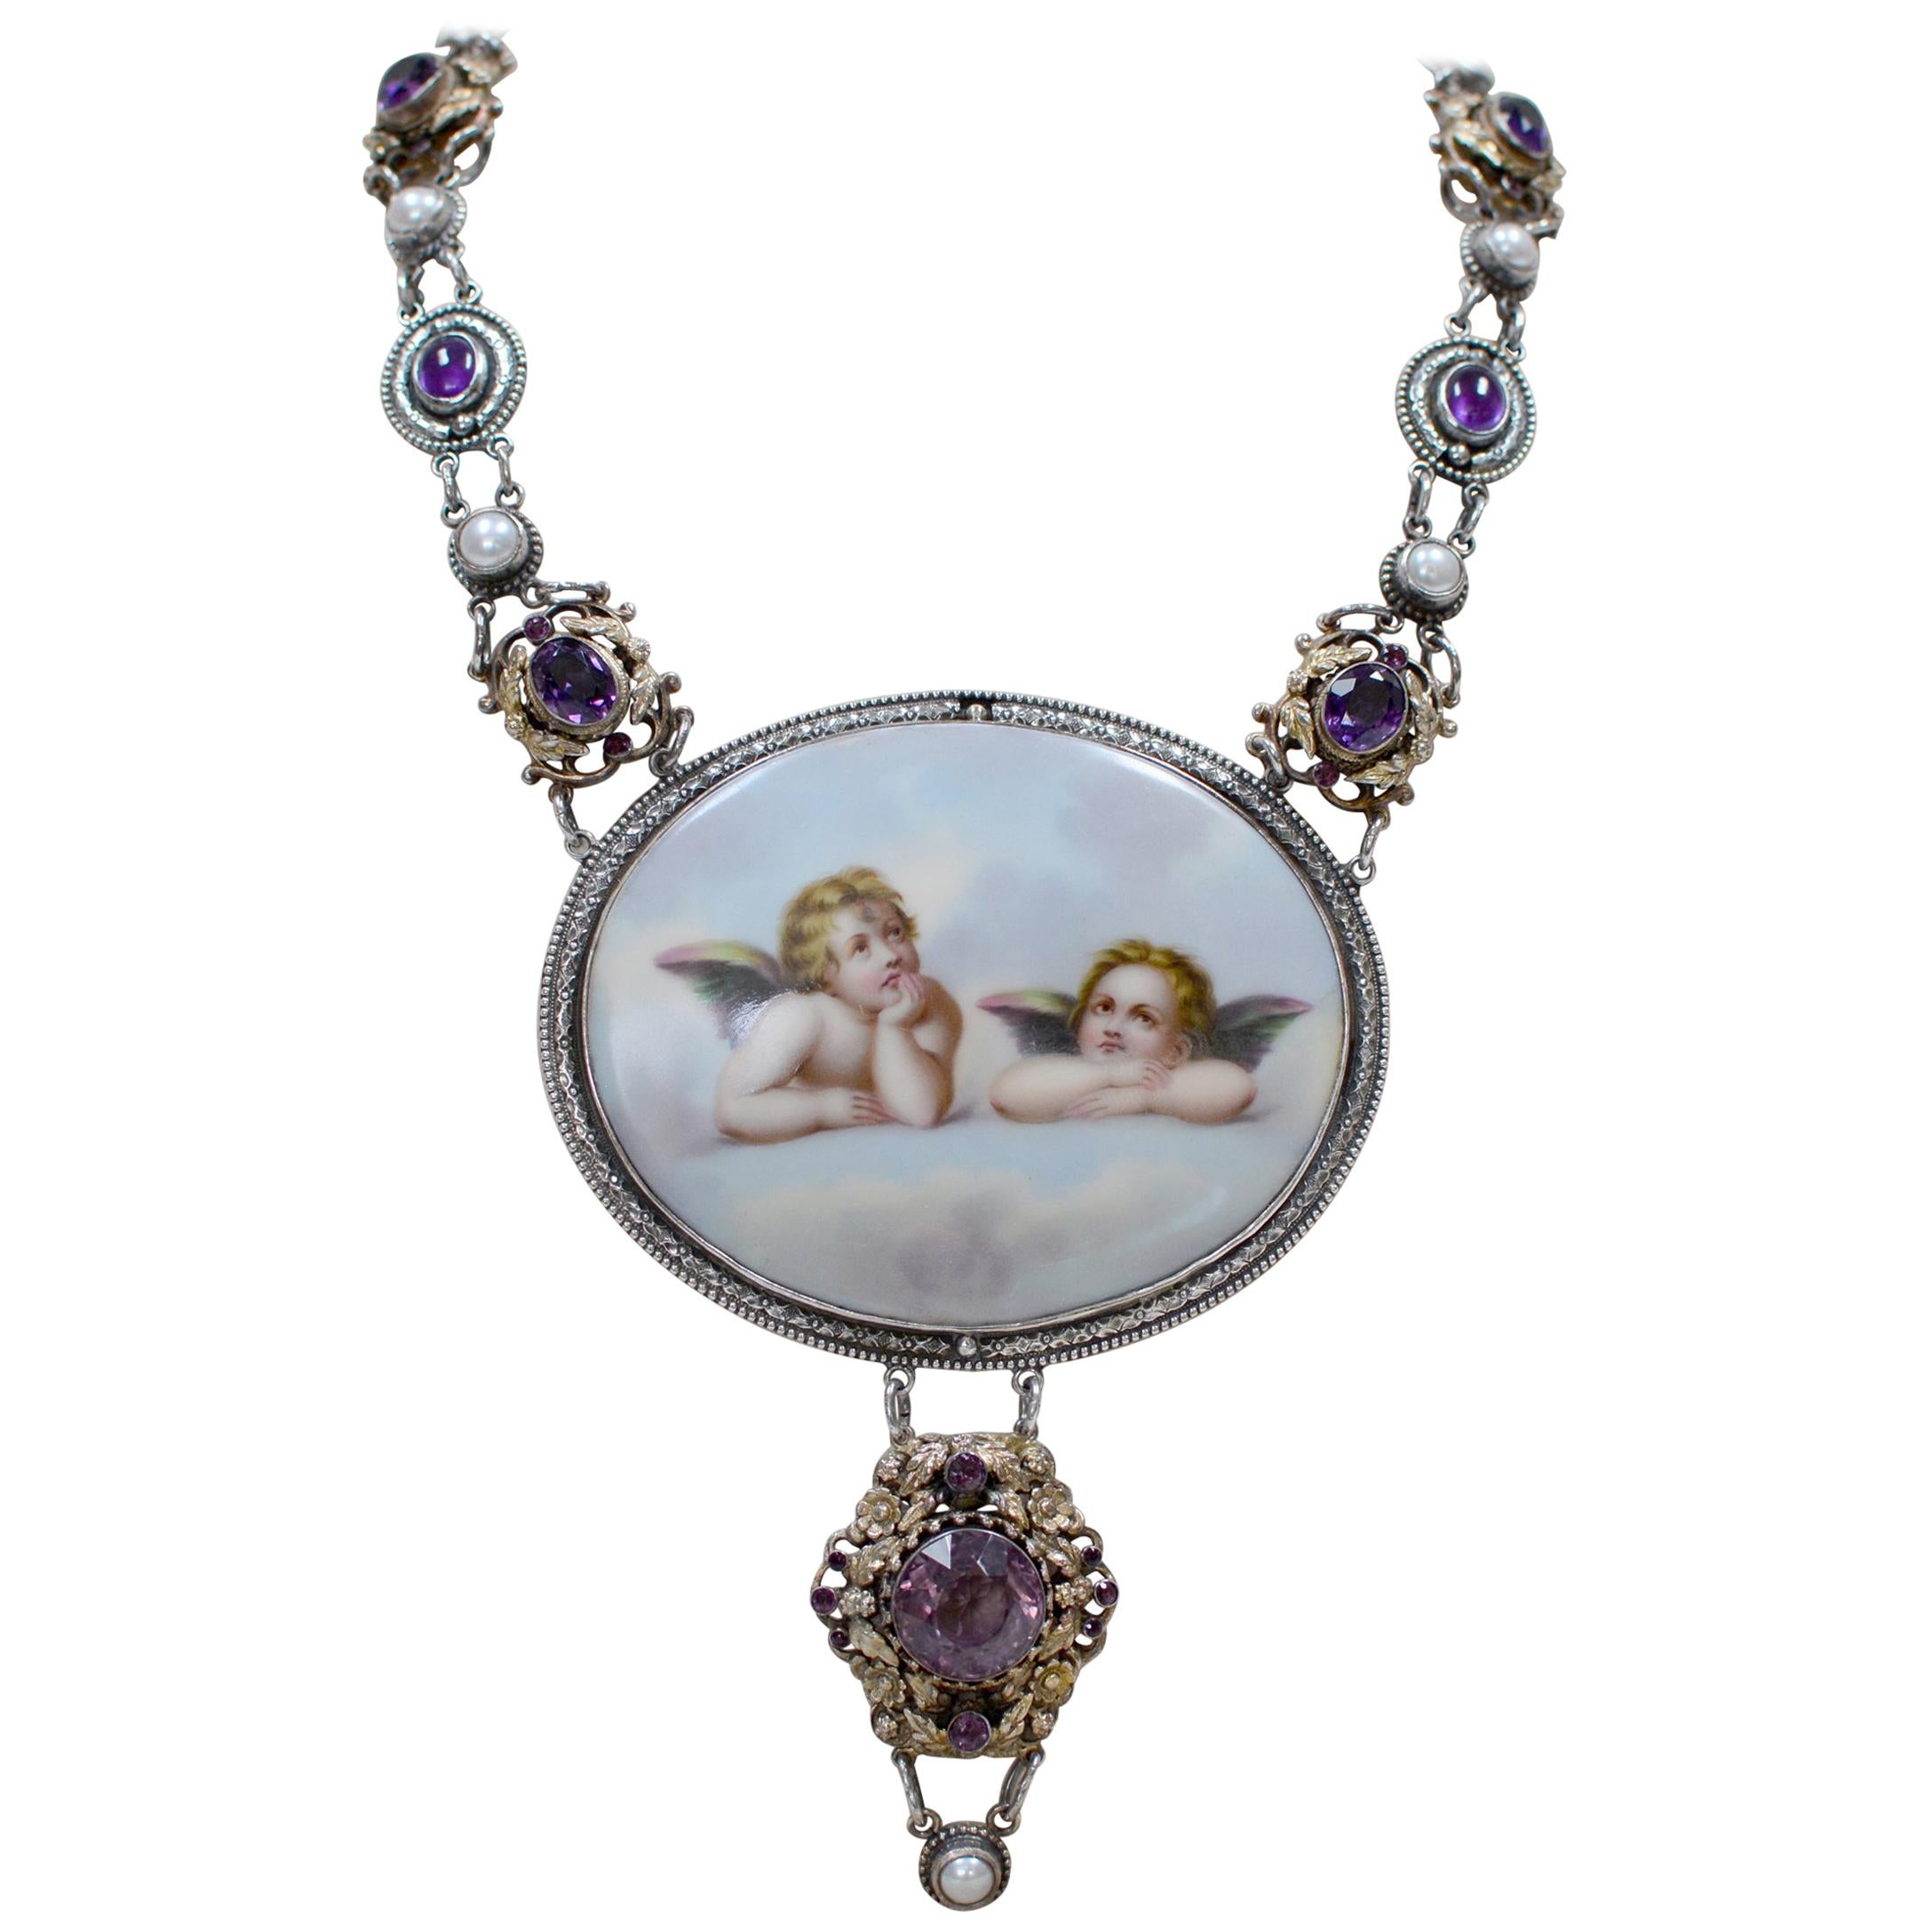 Jill Garber 19th Century Sistine Madonna Angels Portrait Necklace with Amethyst For Sale